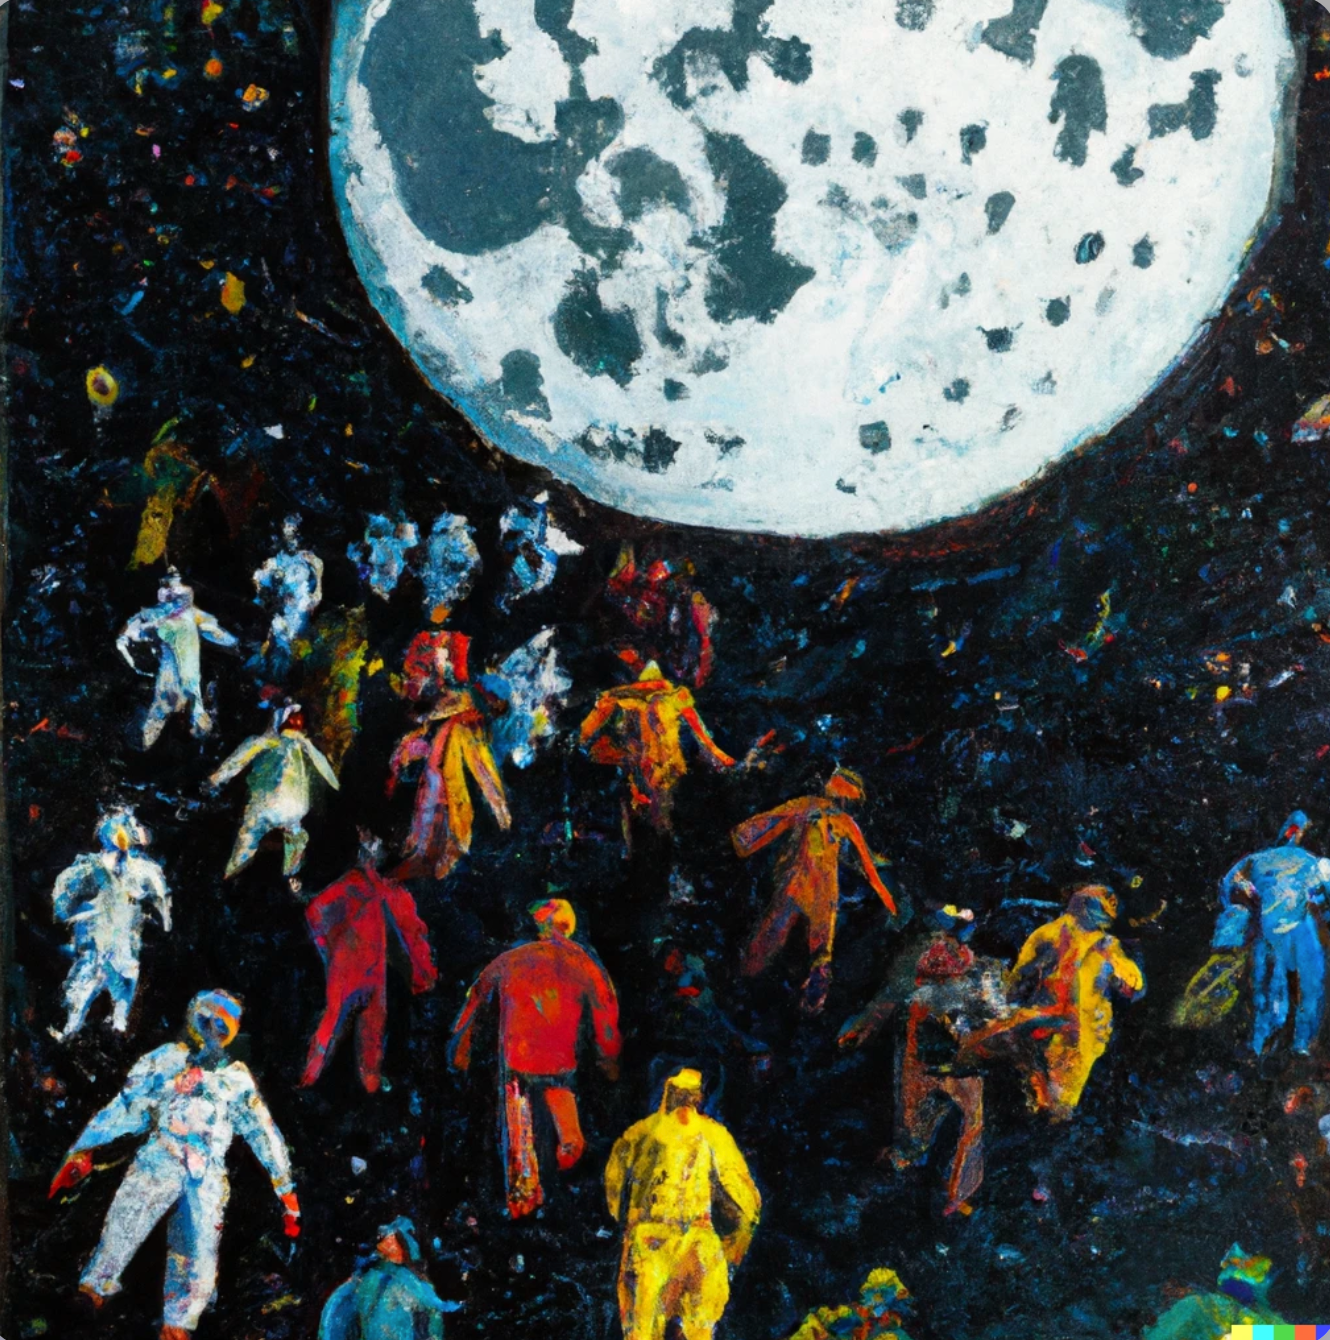 People colonizing the moon